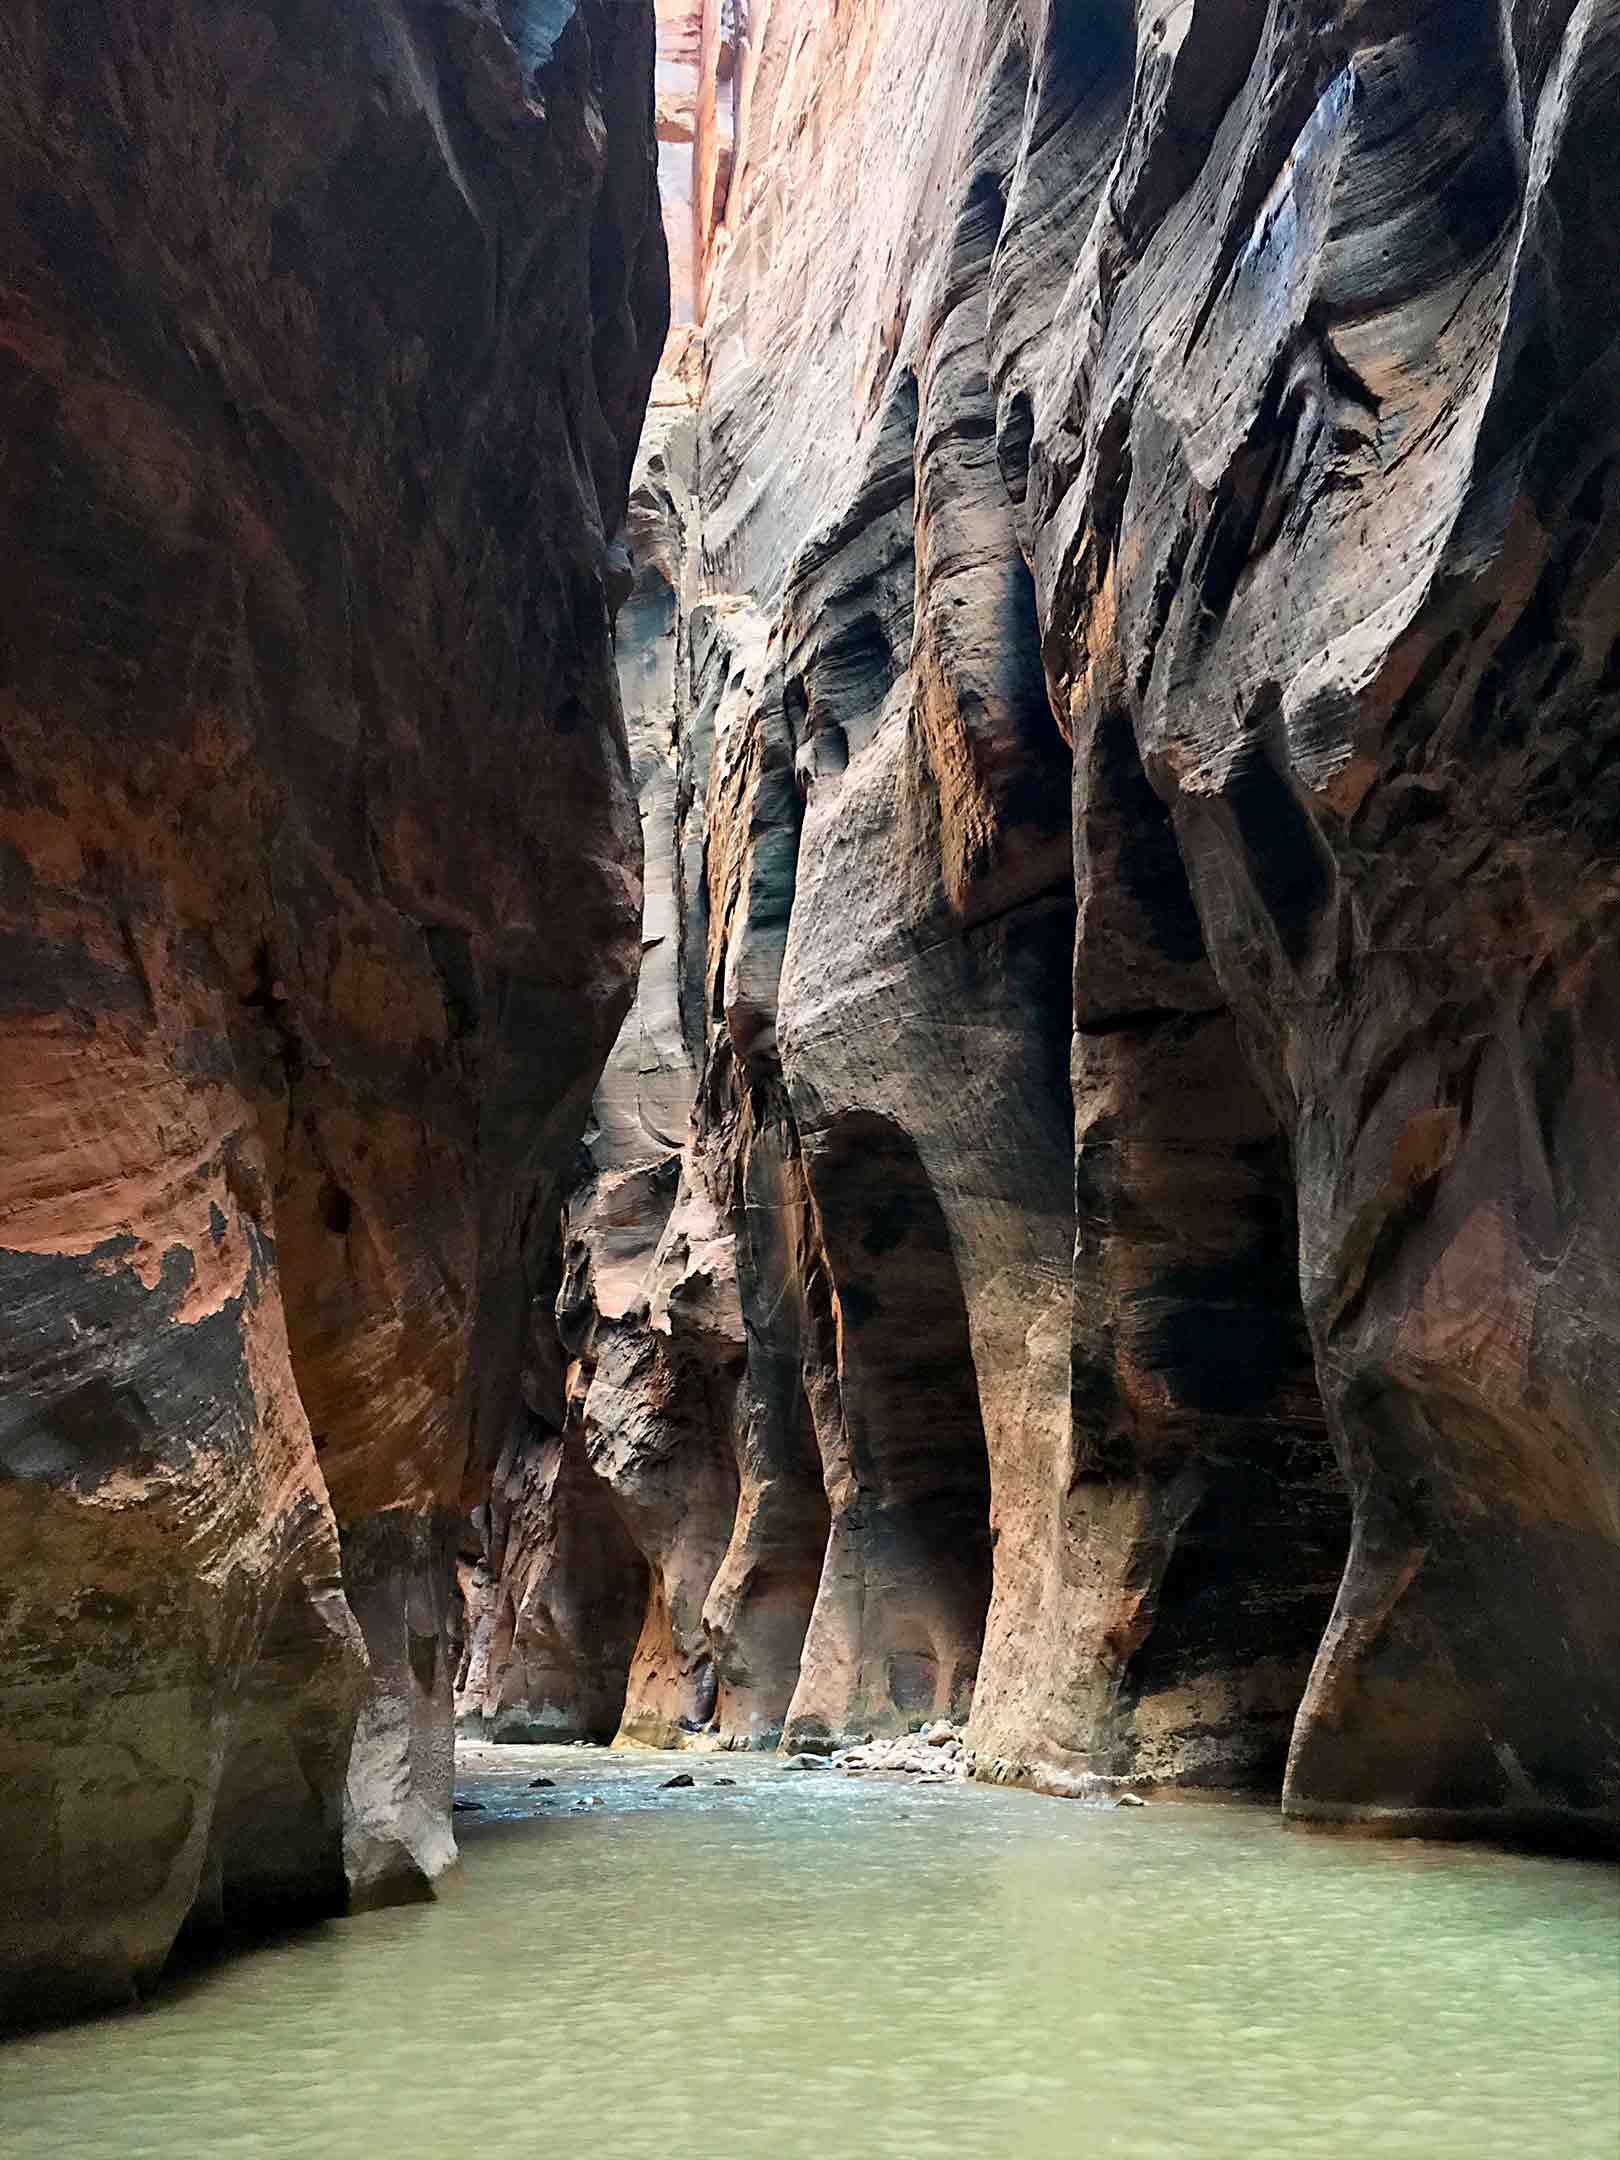 The Narrows Zion National Park Image